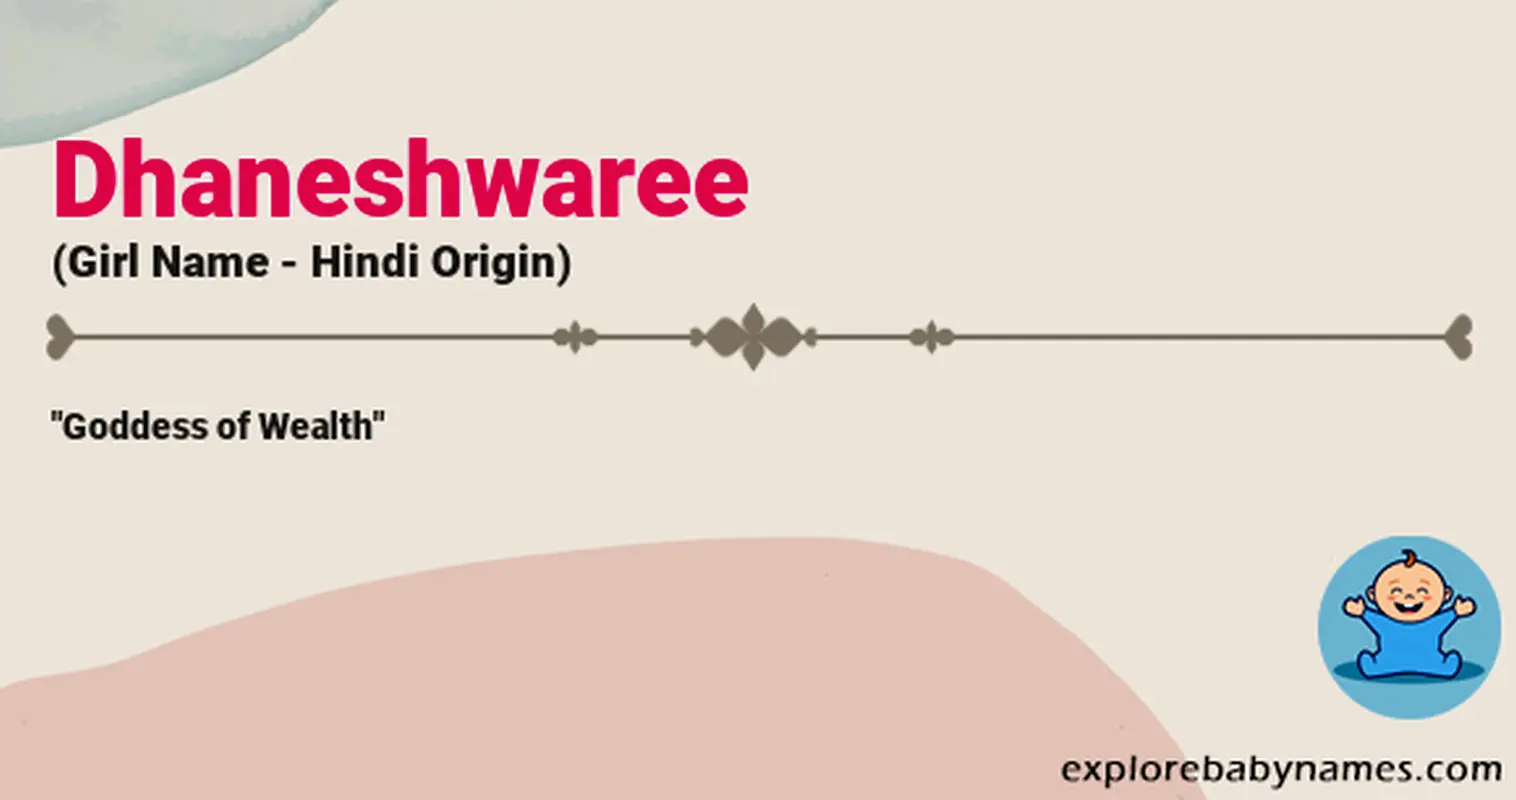 Meaning of Dhaneshwaree